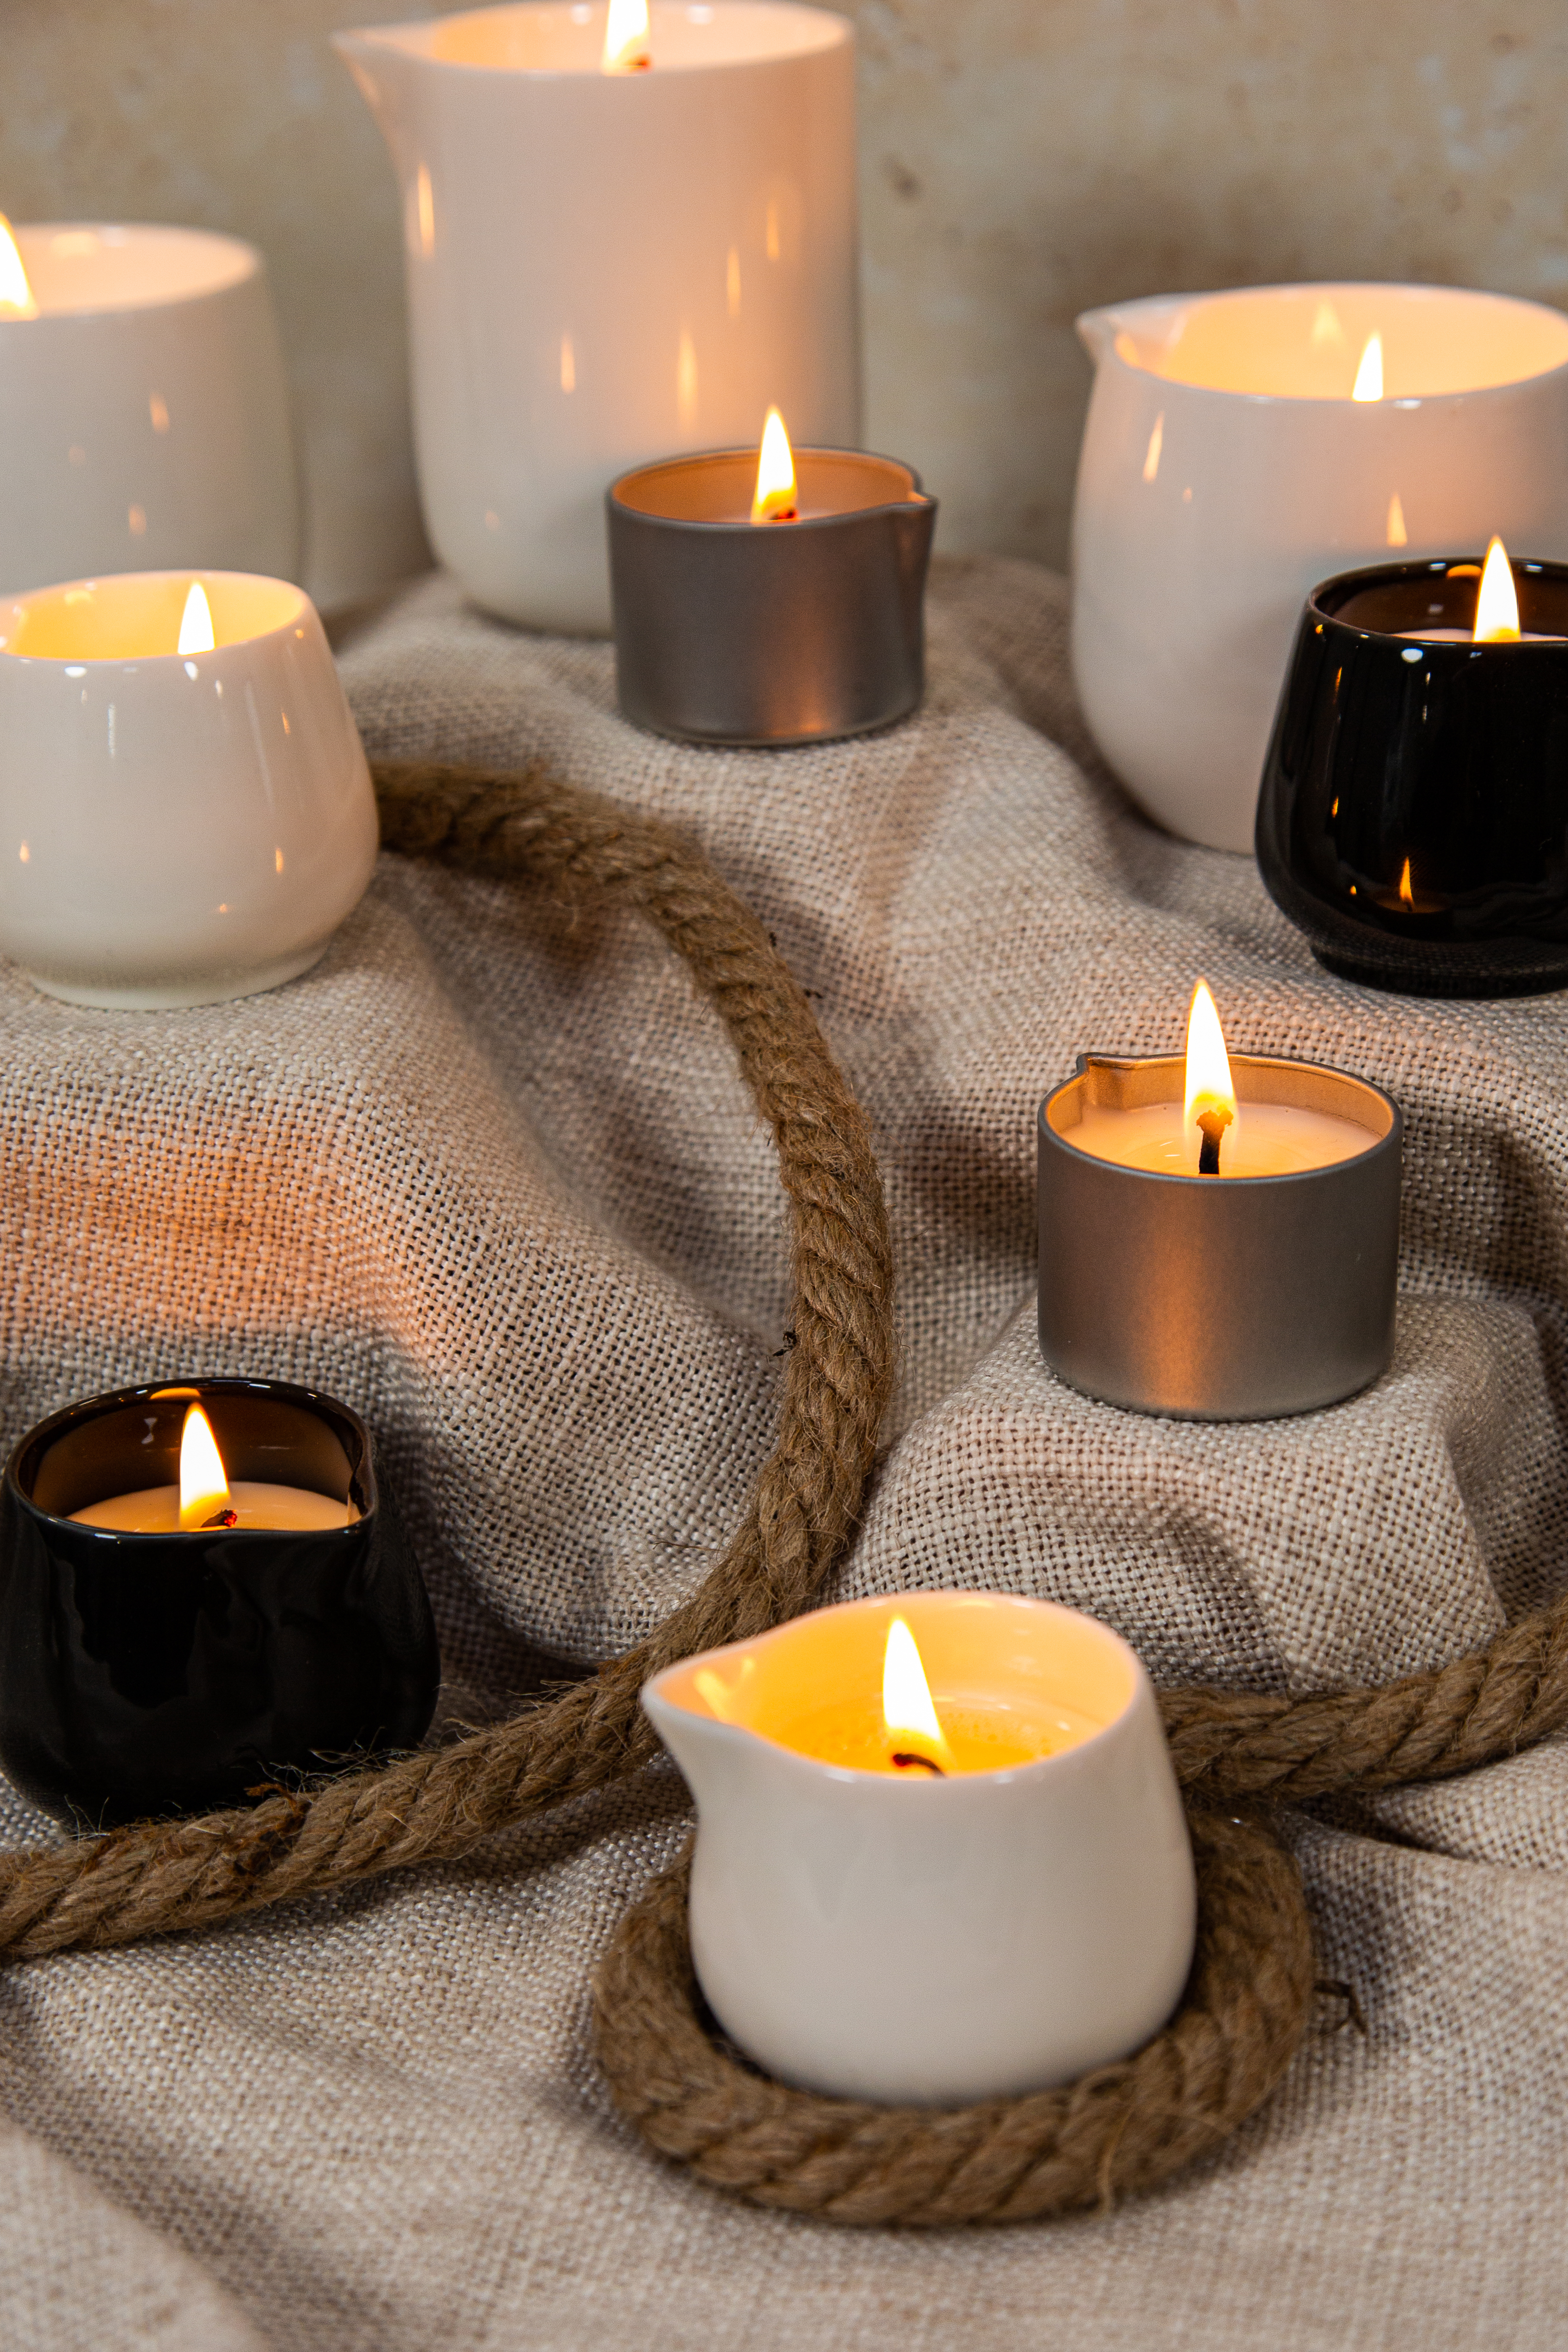 The Best Natural Massage Candles You Can Now Make at Home - School of  Natural Skincare